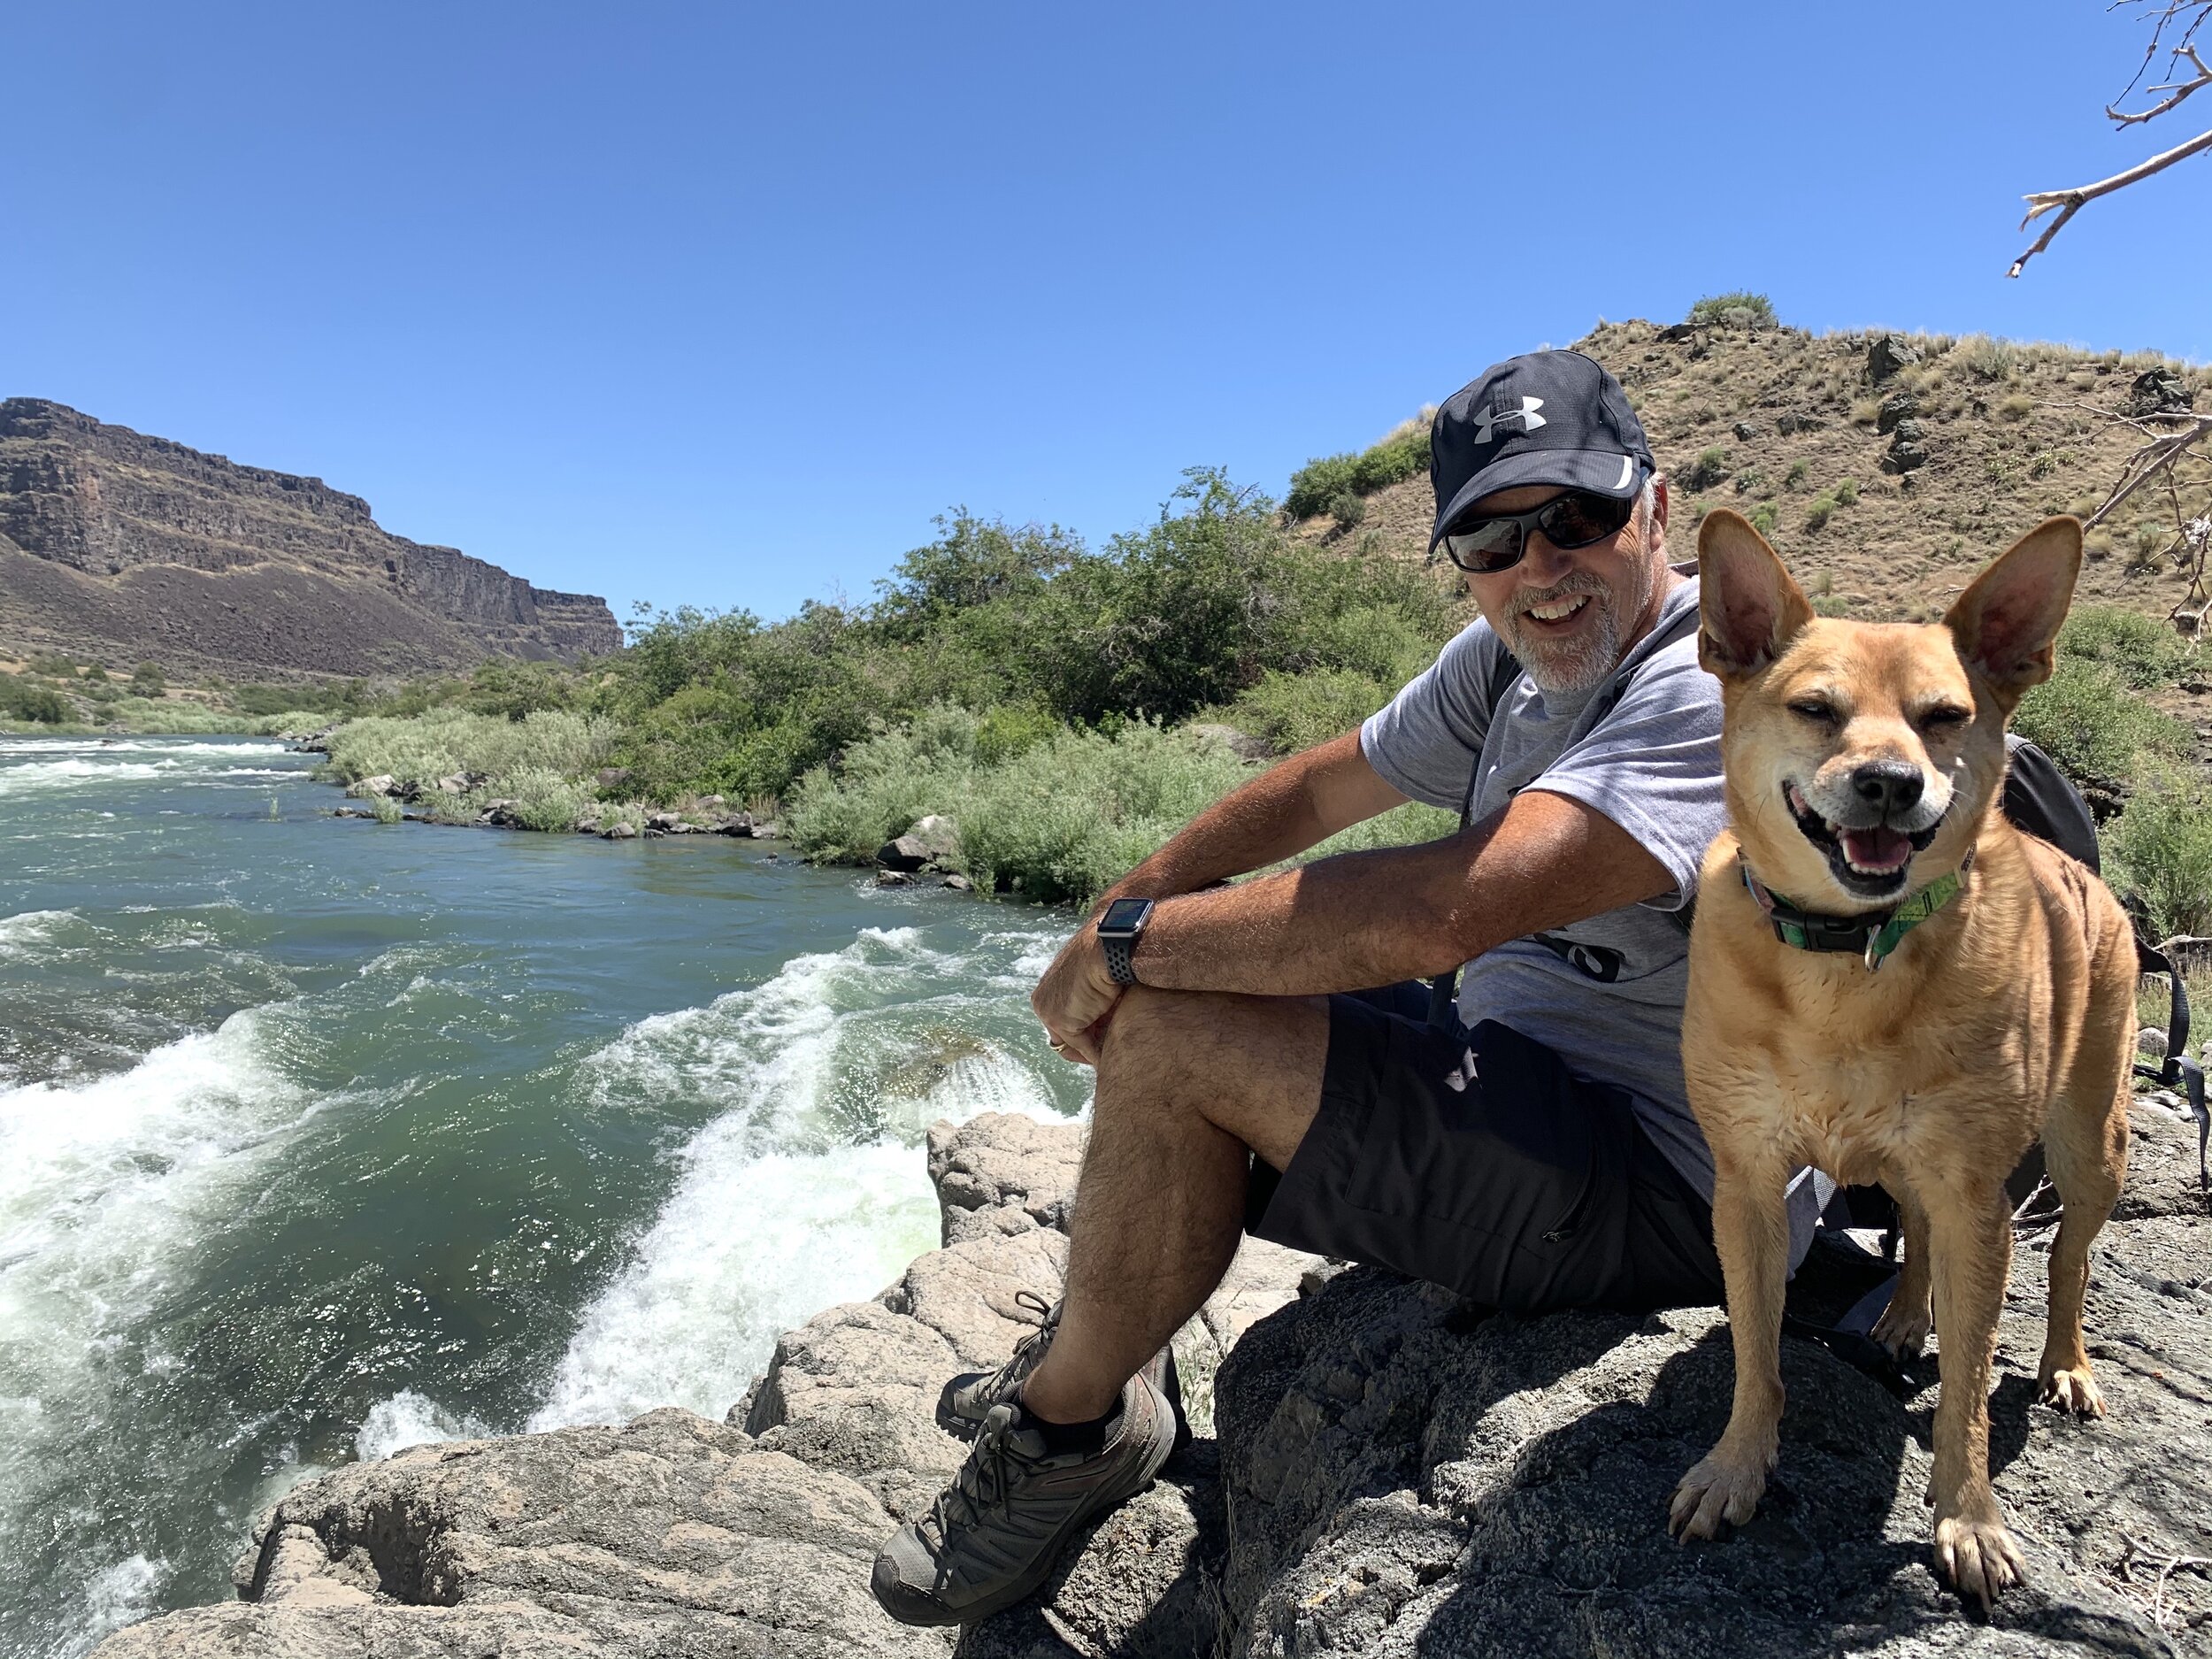  On another day, we hiked along the Snake River at Auger Falls Park. It was hot and we enjoyed our breaks by the rushing water. 